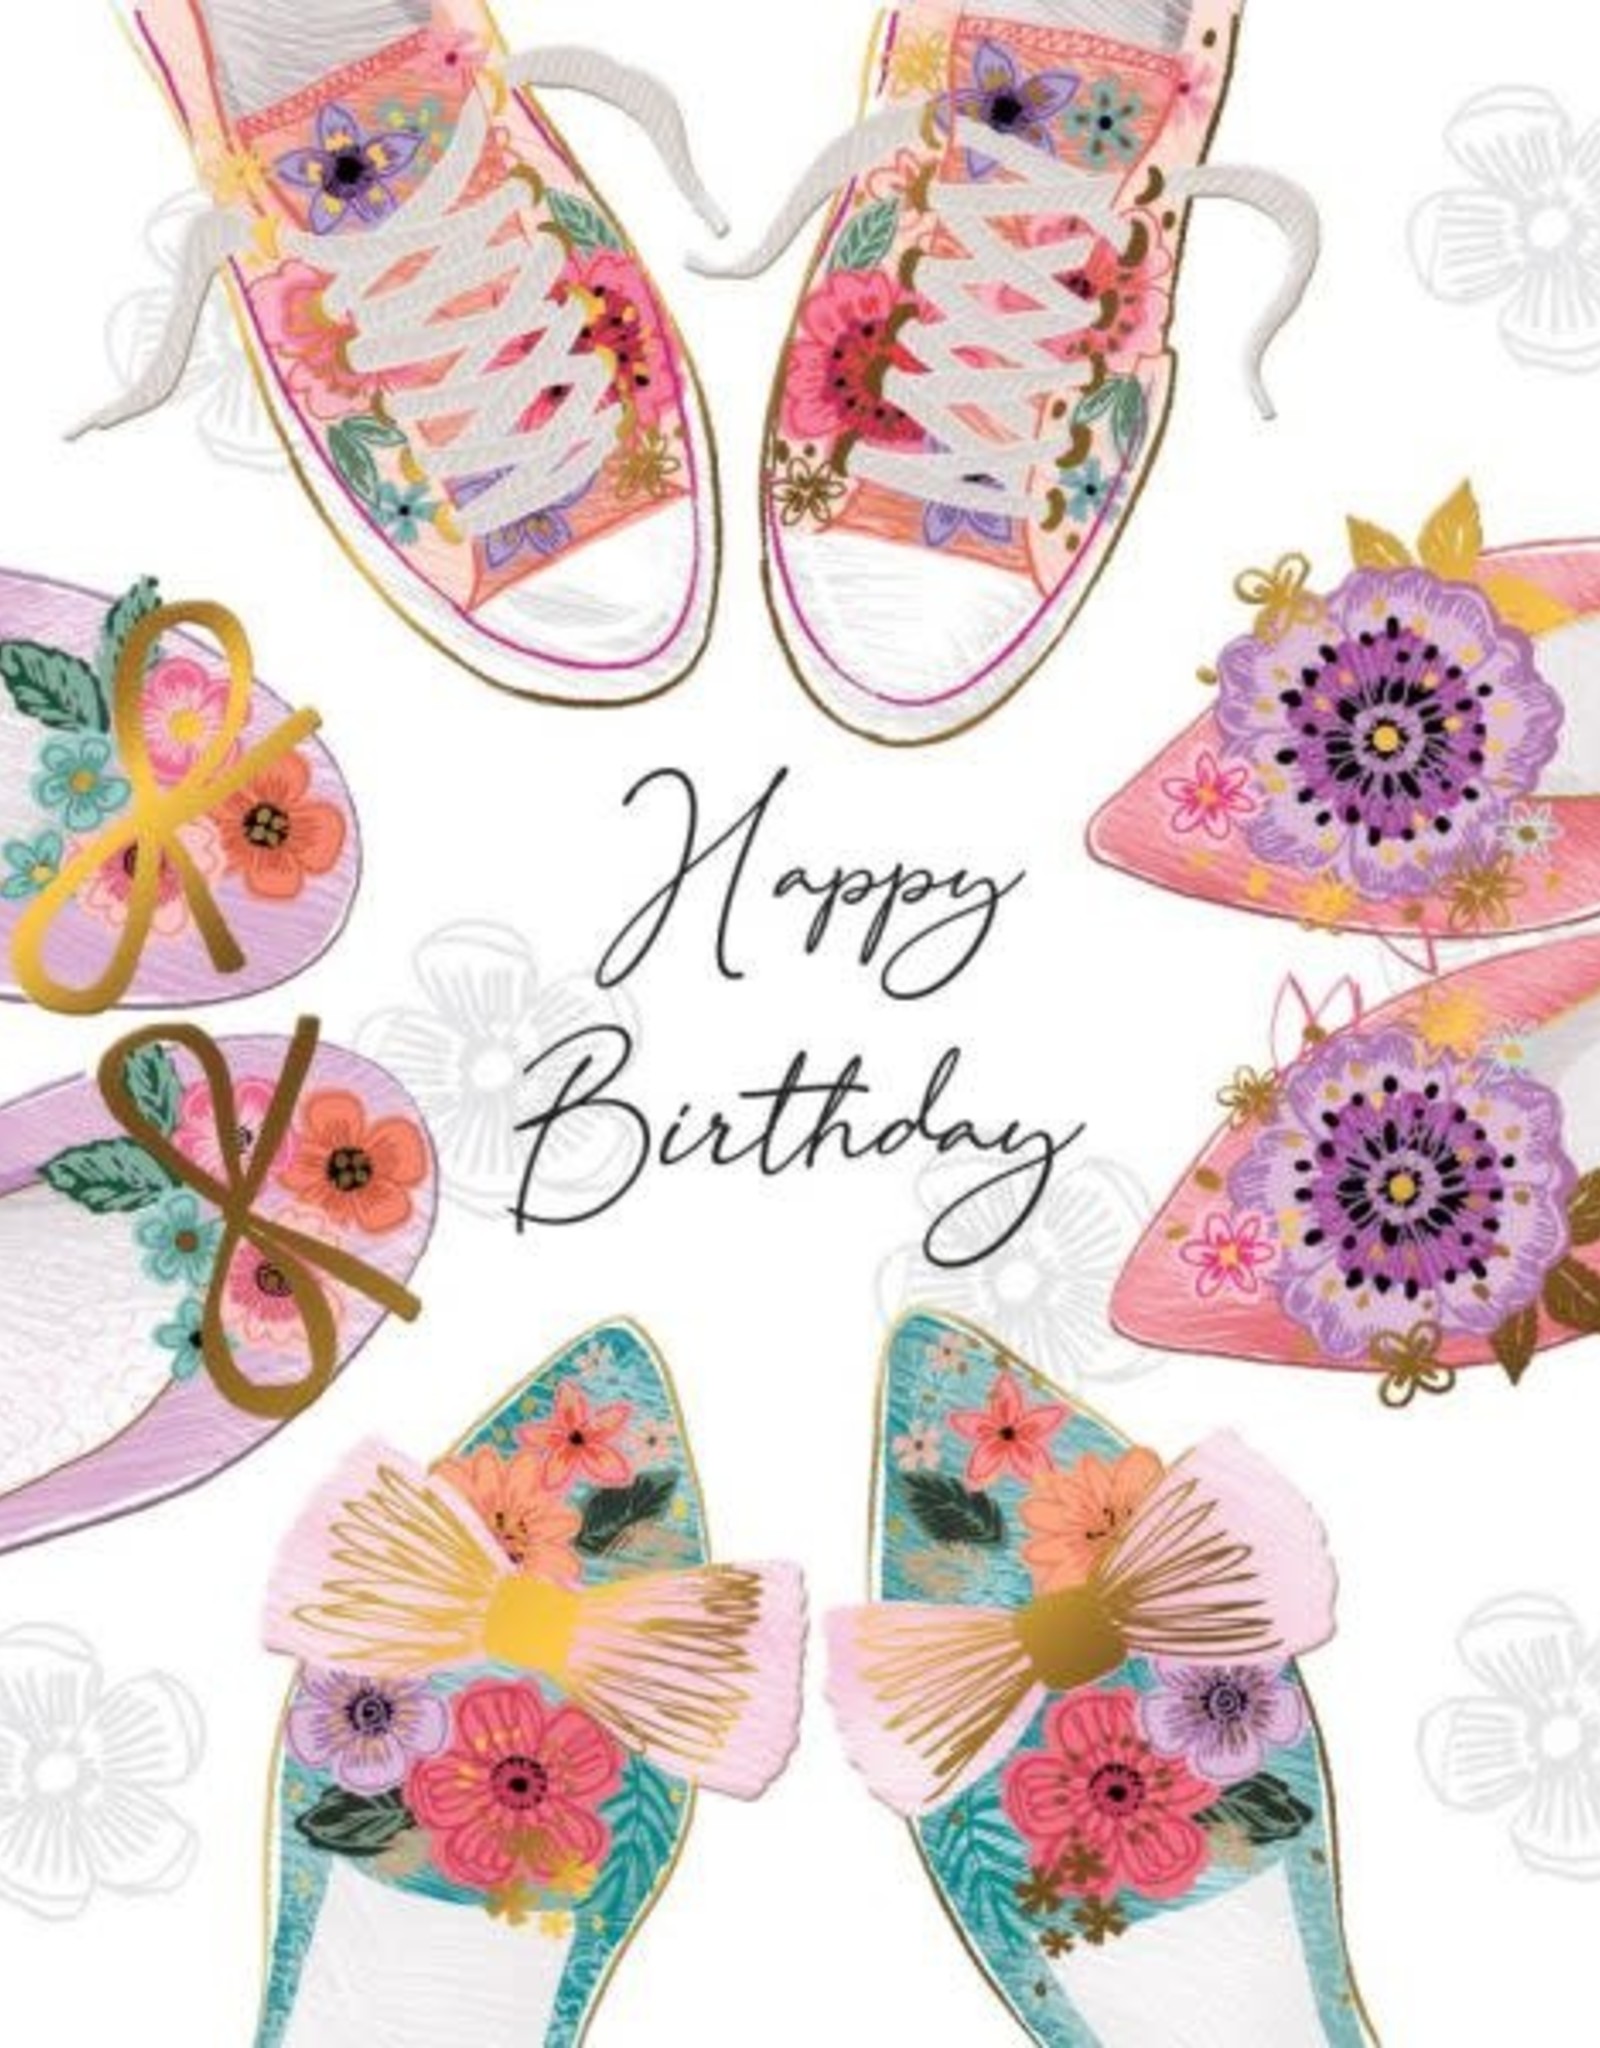 Incognito SUBLIME - HAPPY BIRTHDAY - SHOES (6